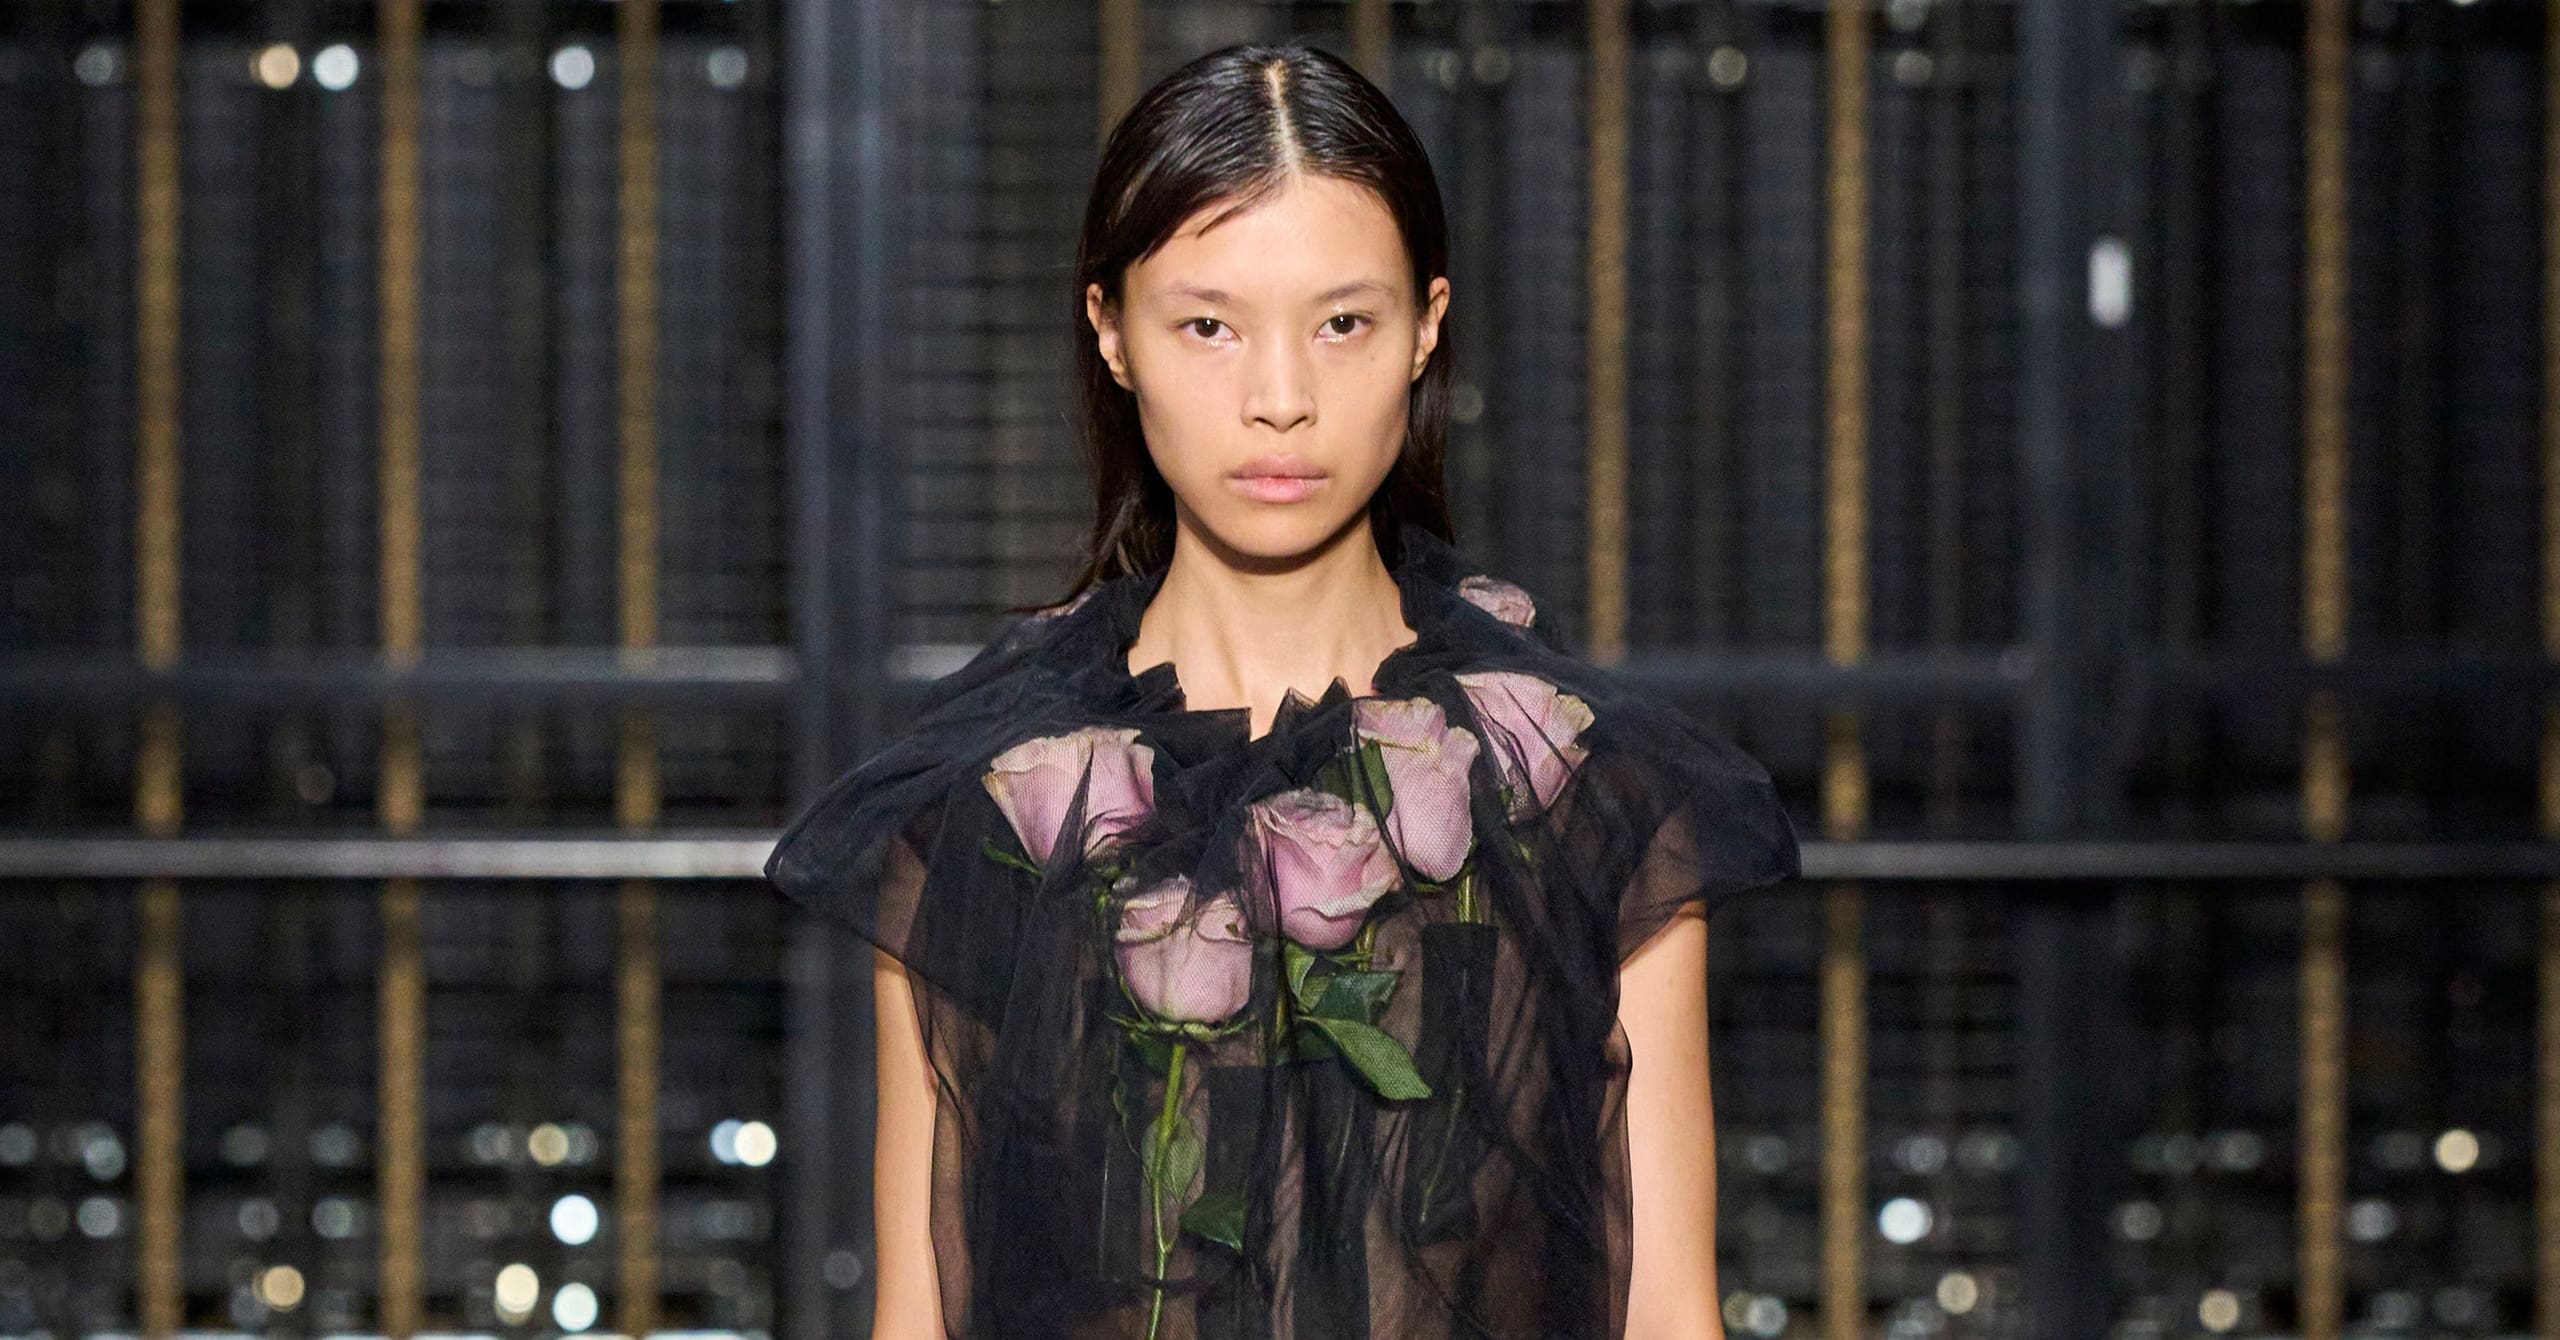 Black dress with roses by Simone Rocha. Black floral dress.